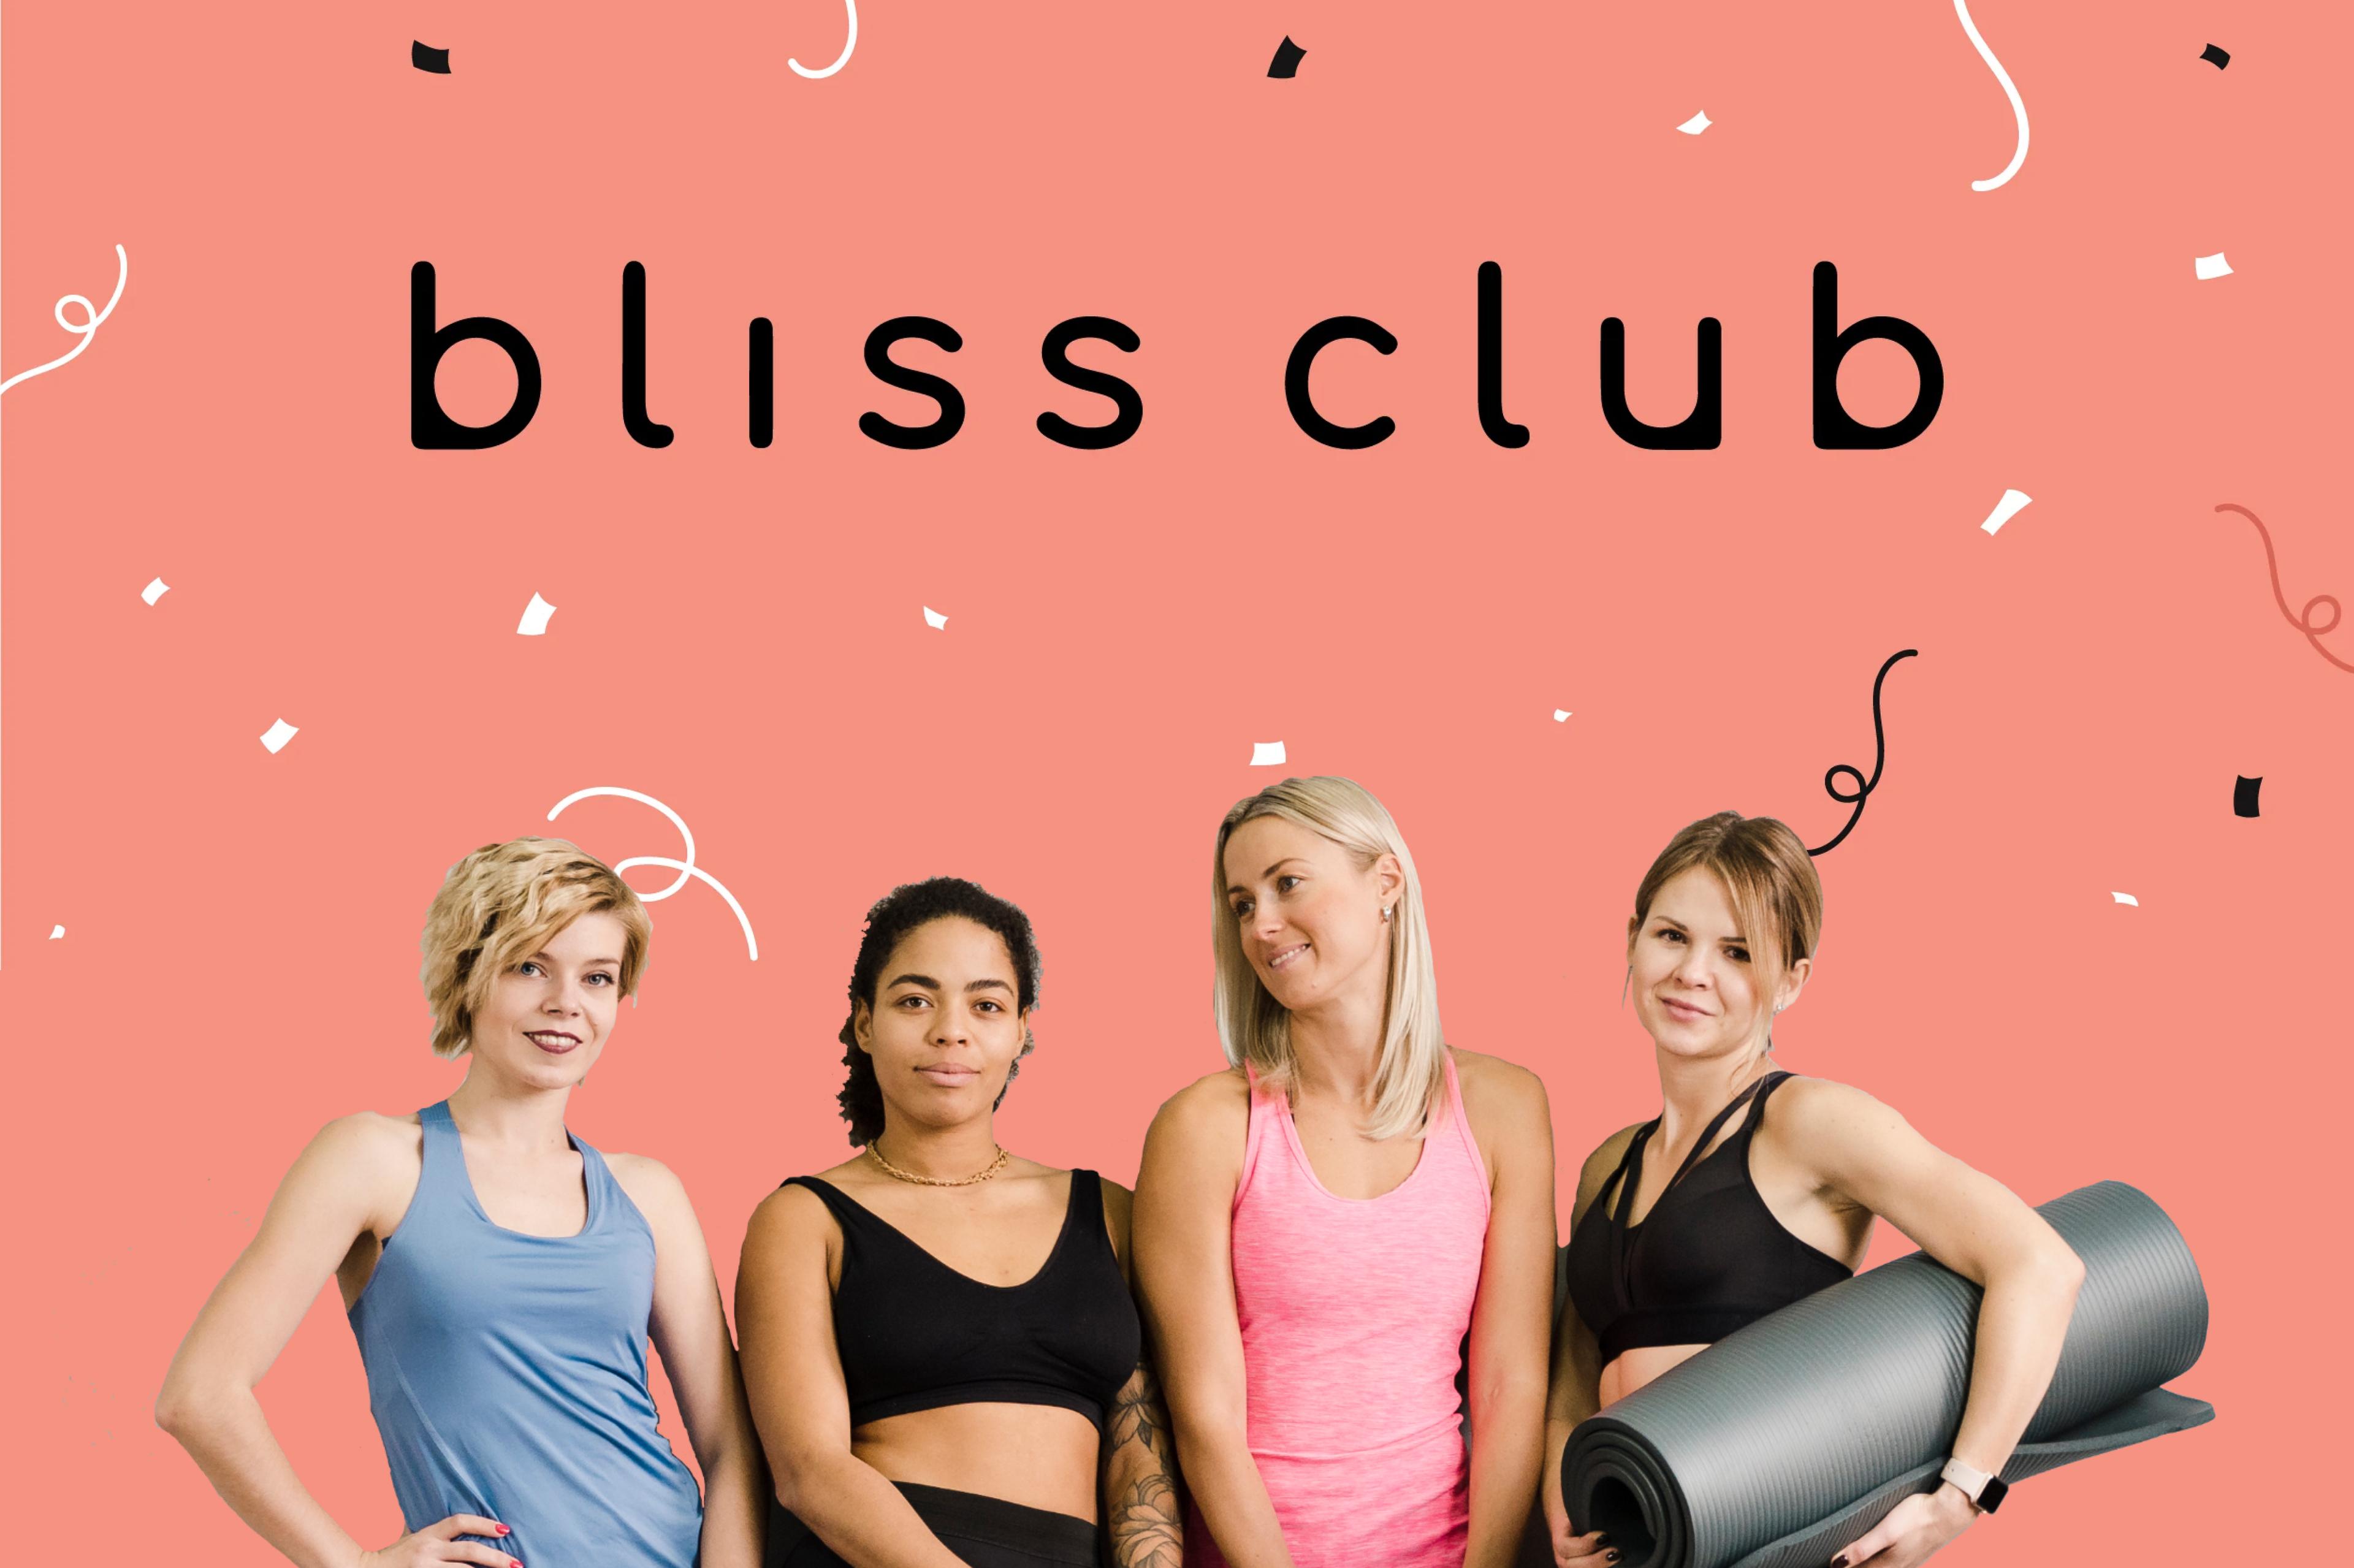 Blissclub on LinkedIn: Our activewear is made for real women; not